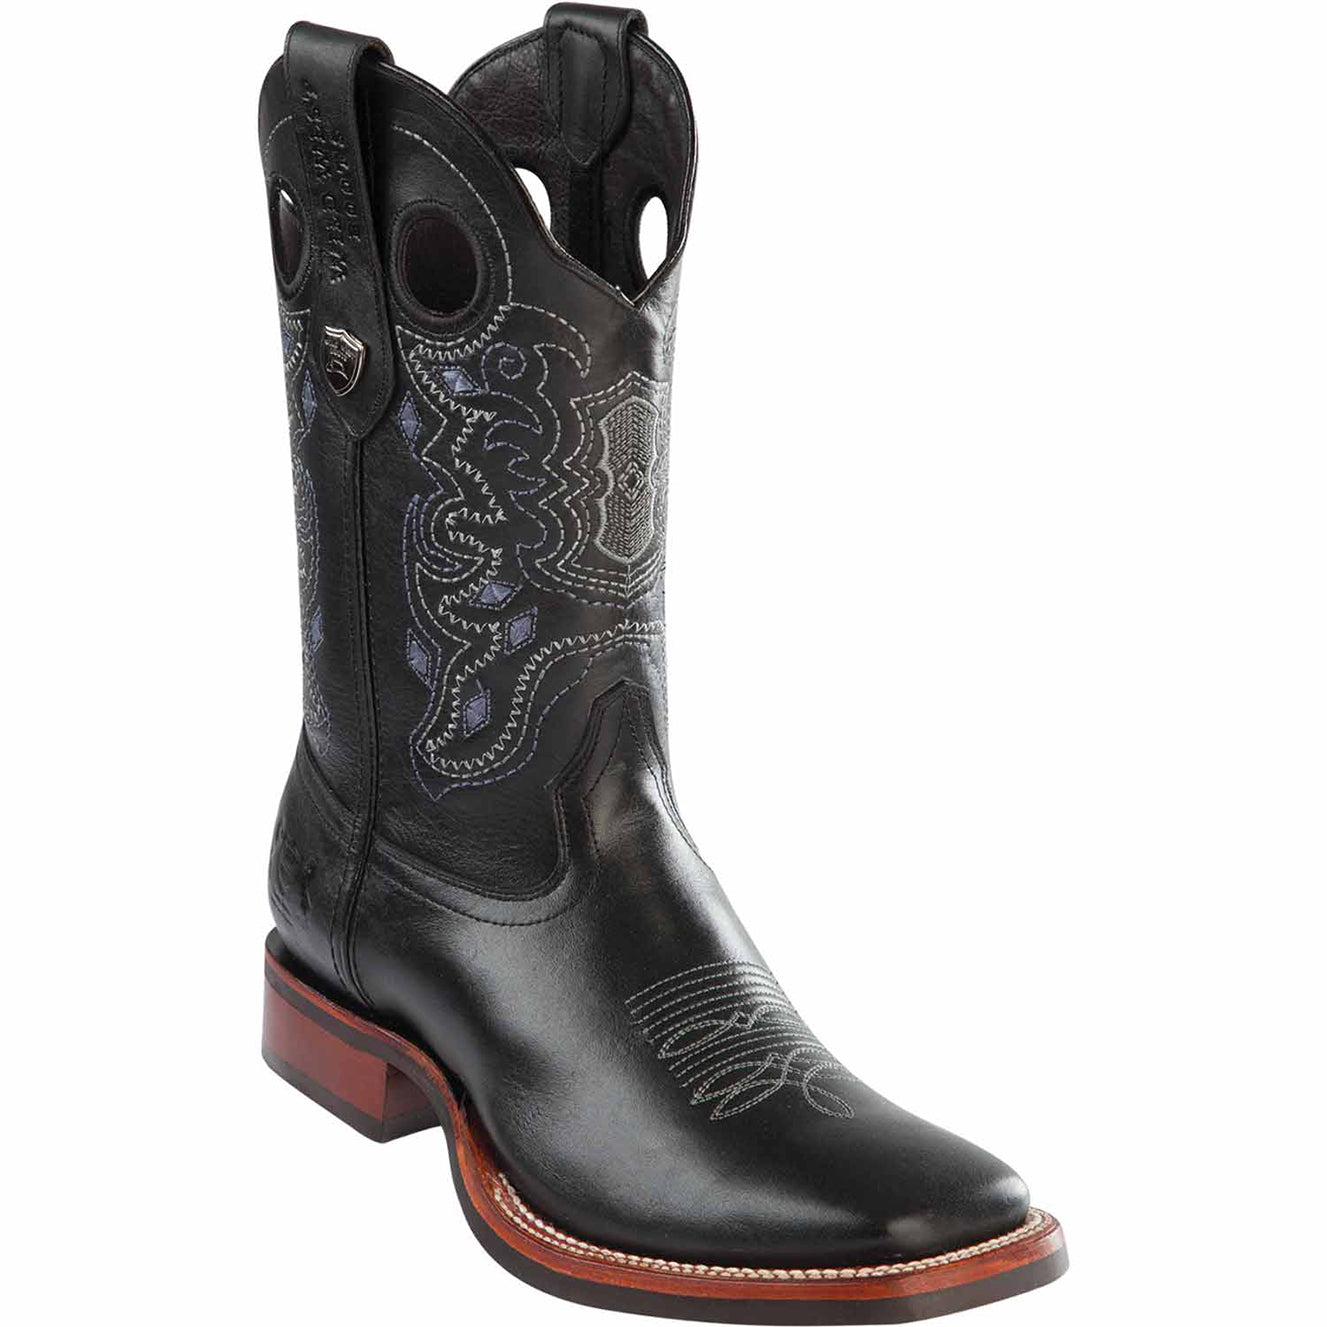 Mens Black Square Toe Boots Rubber Sole - Wild West Boots